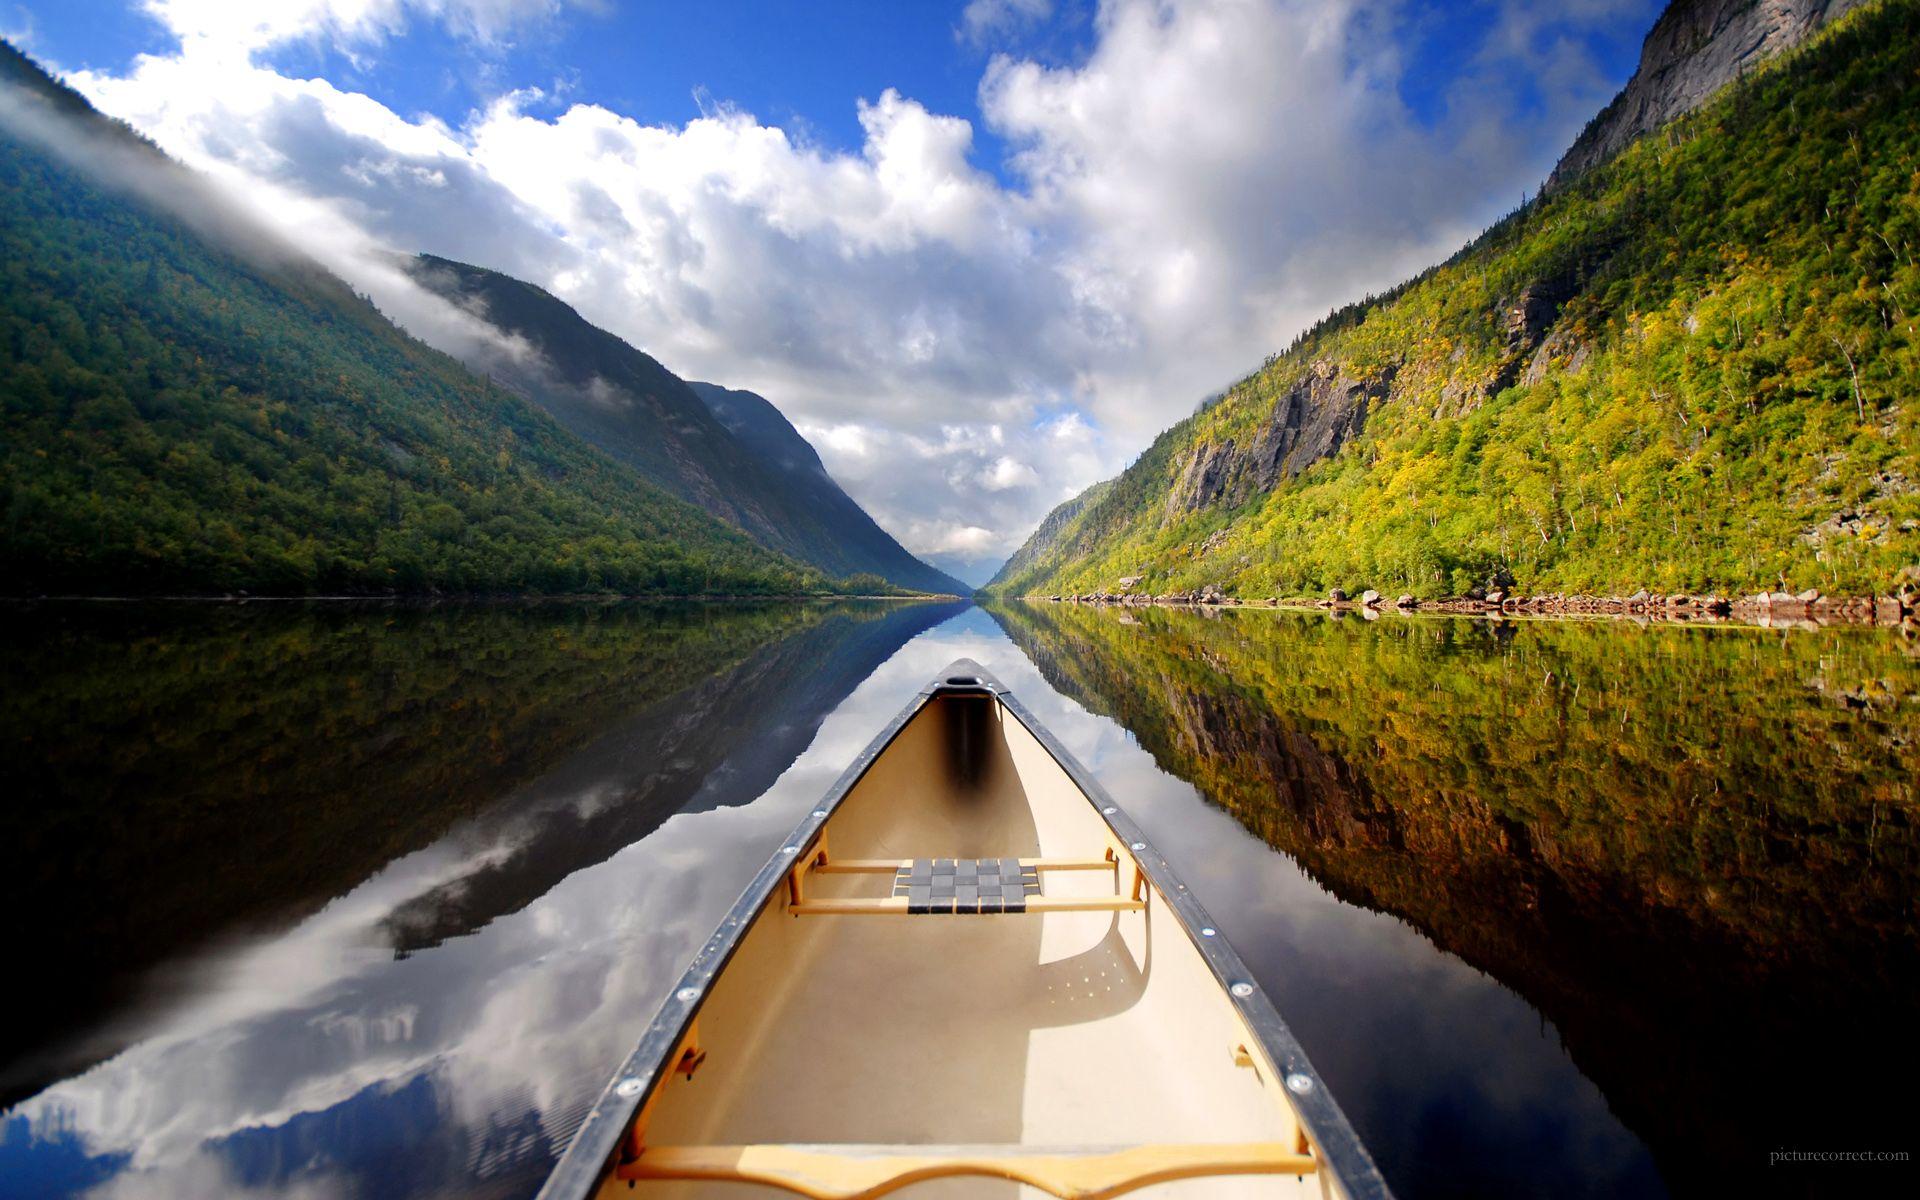 Daily Wallpaper: Mountain View from Canoe. I Like To Waste My Time